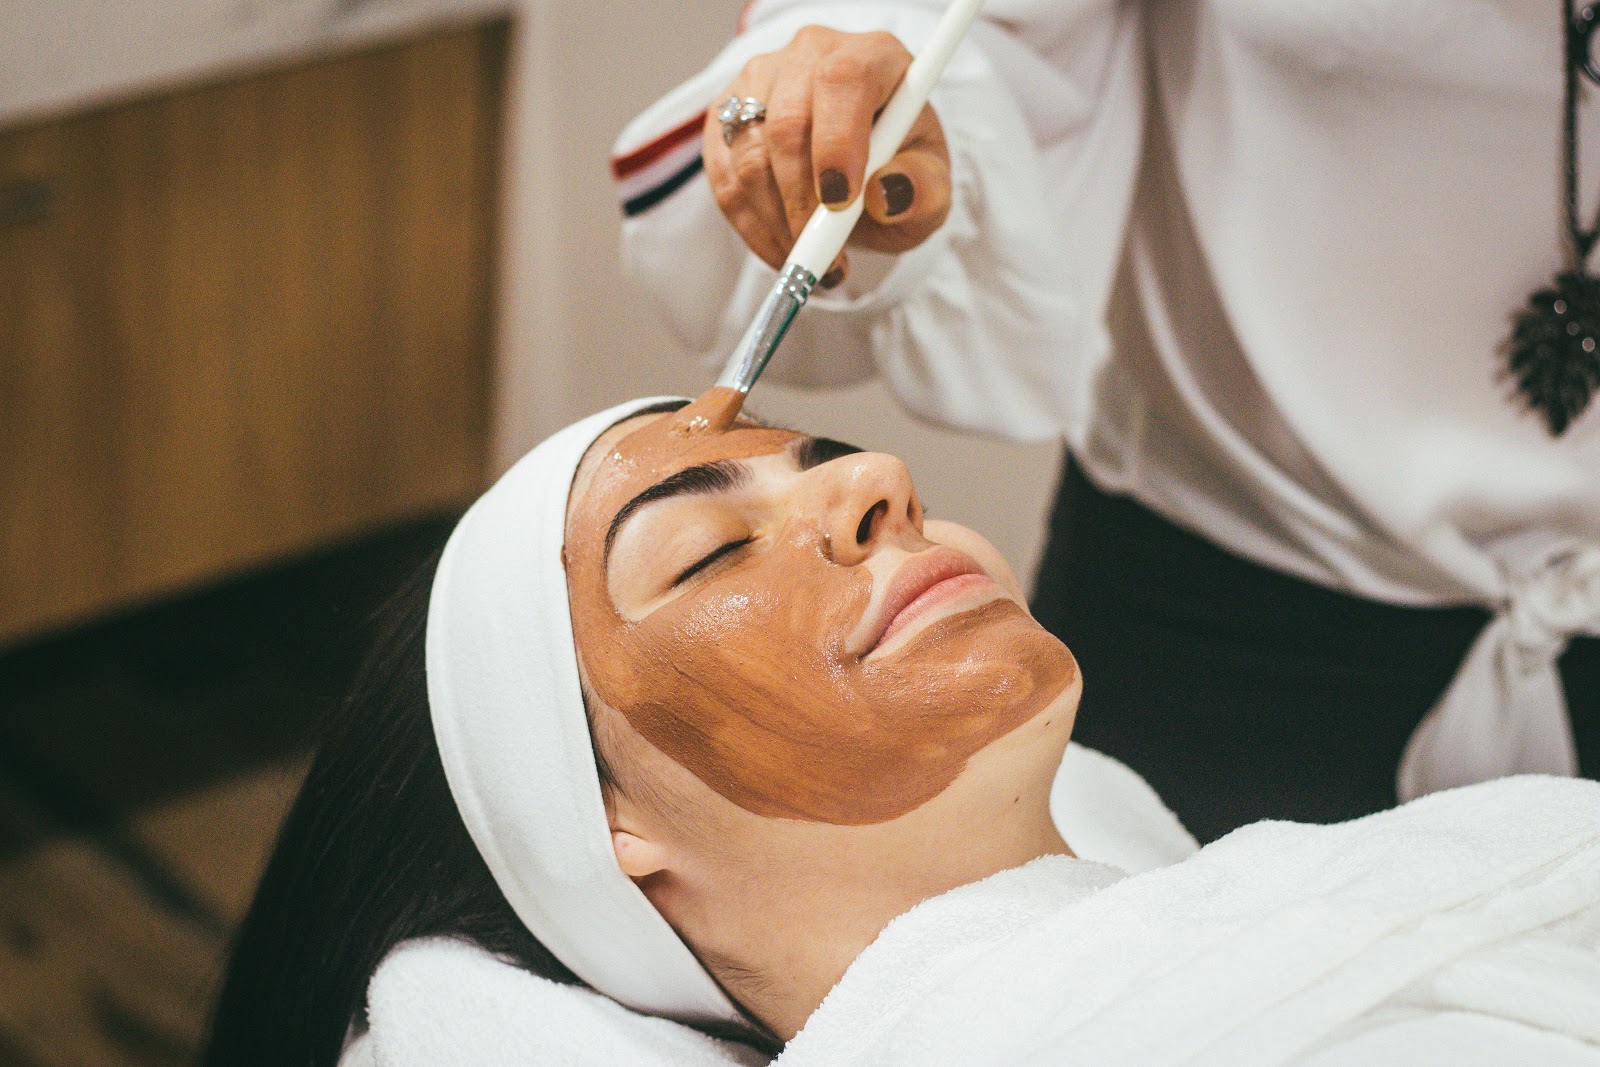 woman getting a facial treatment done at a spa